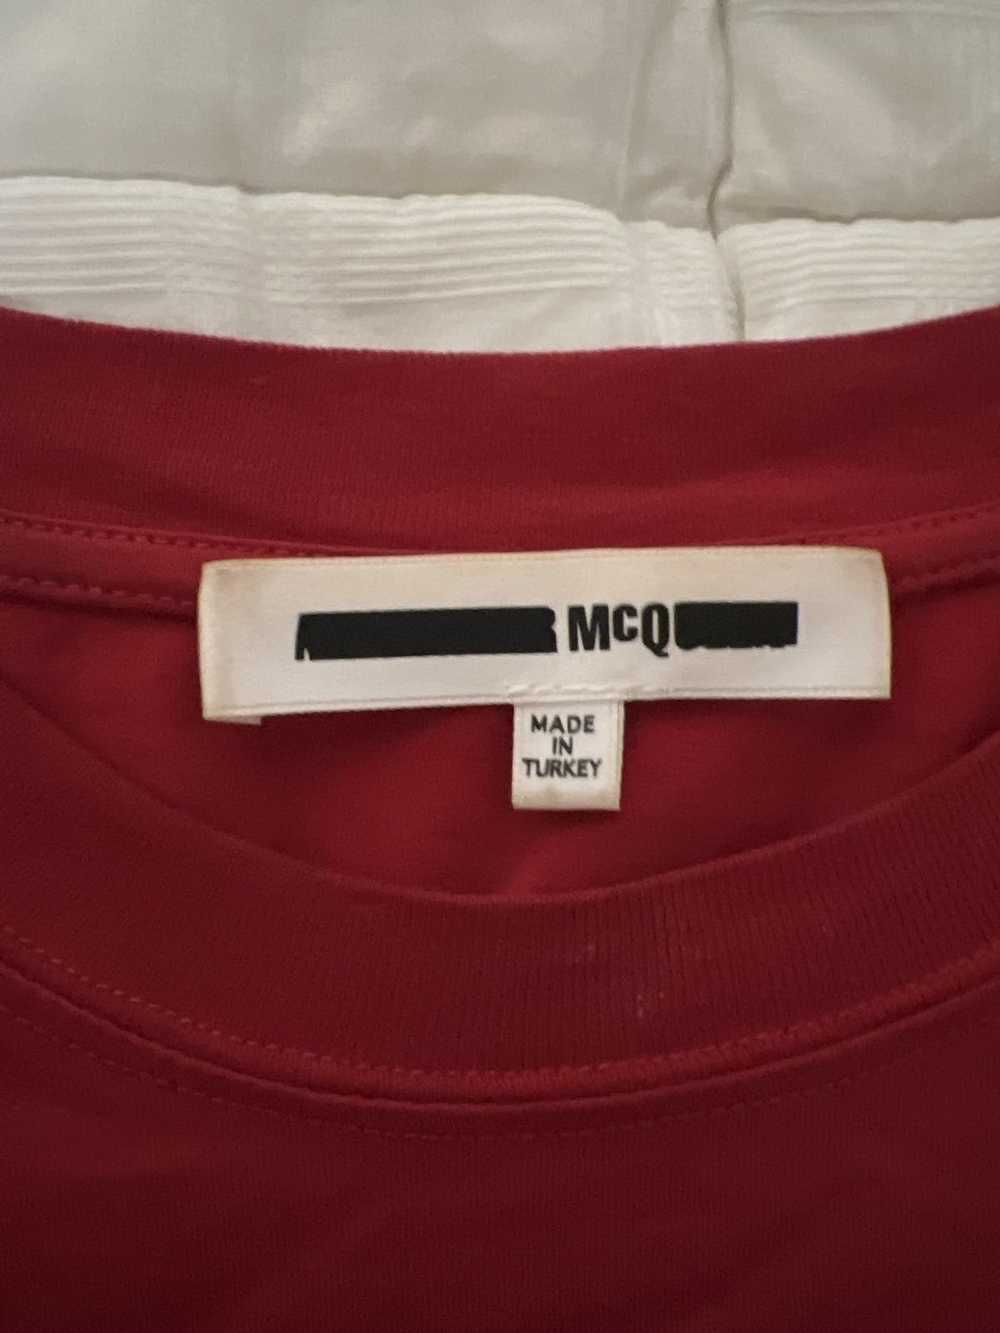 Alexander McQueen Red basic MCQ tee - image 6